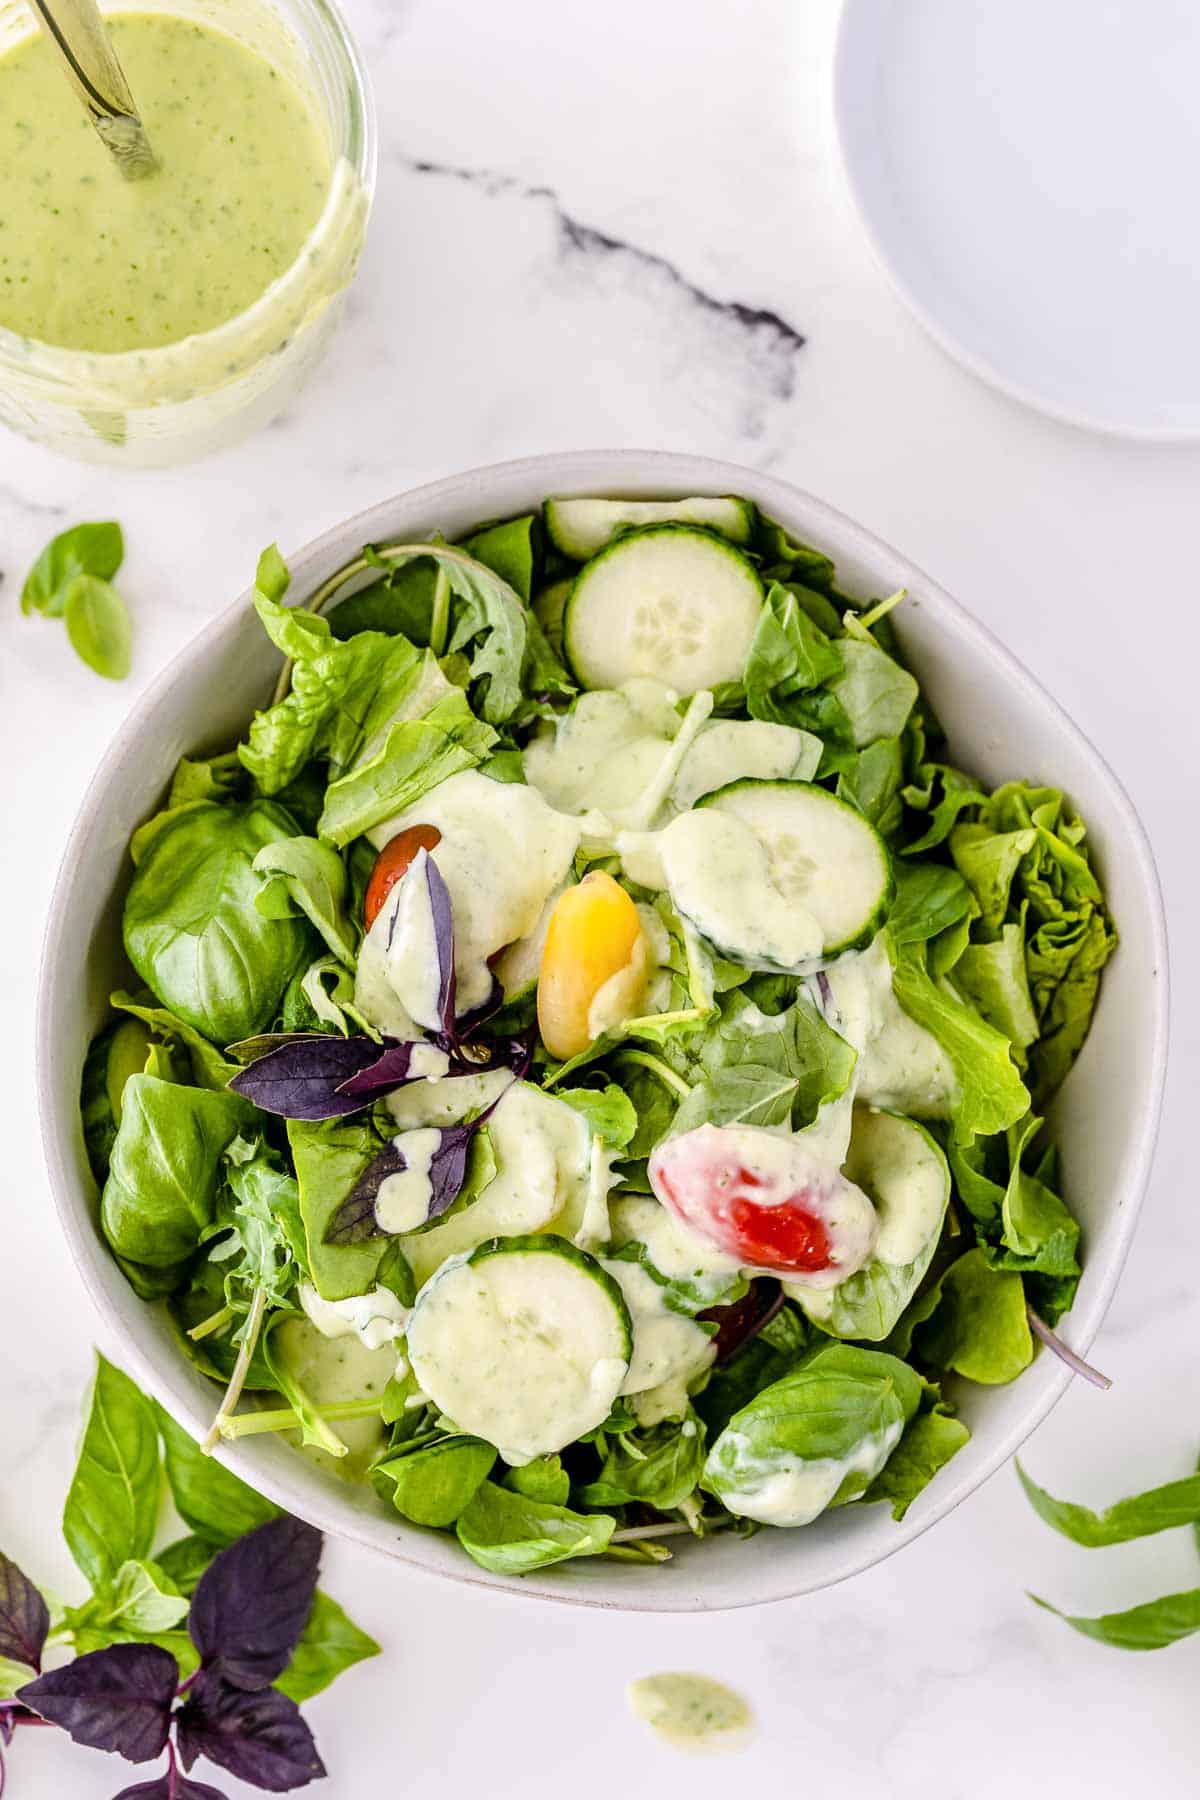 A green salad dressed with Basil Buttermilk Dressing.